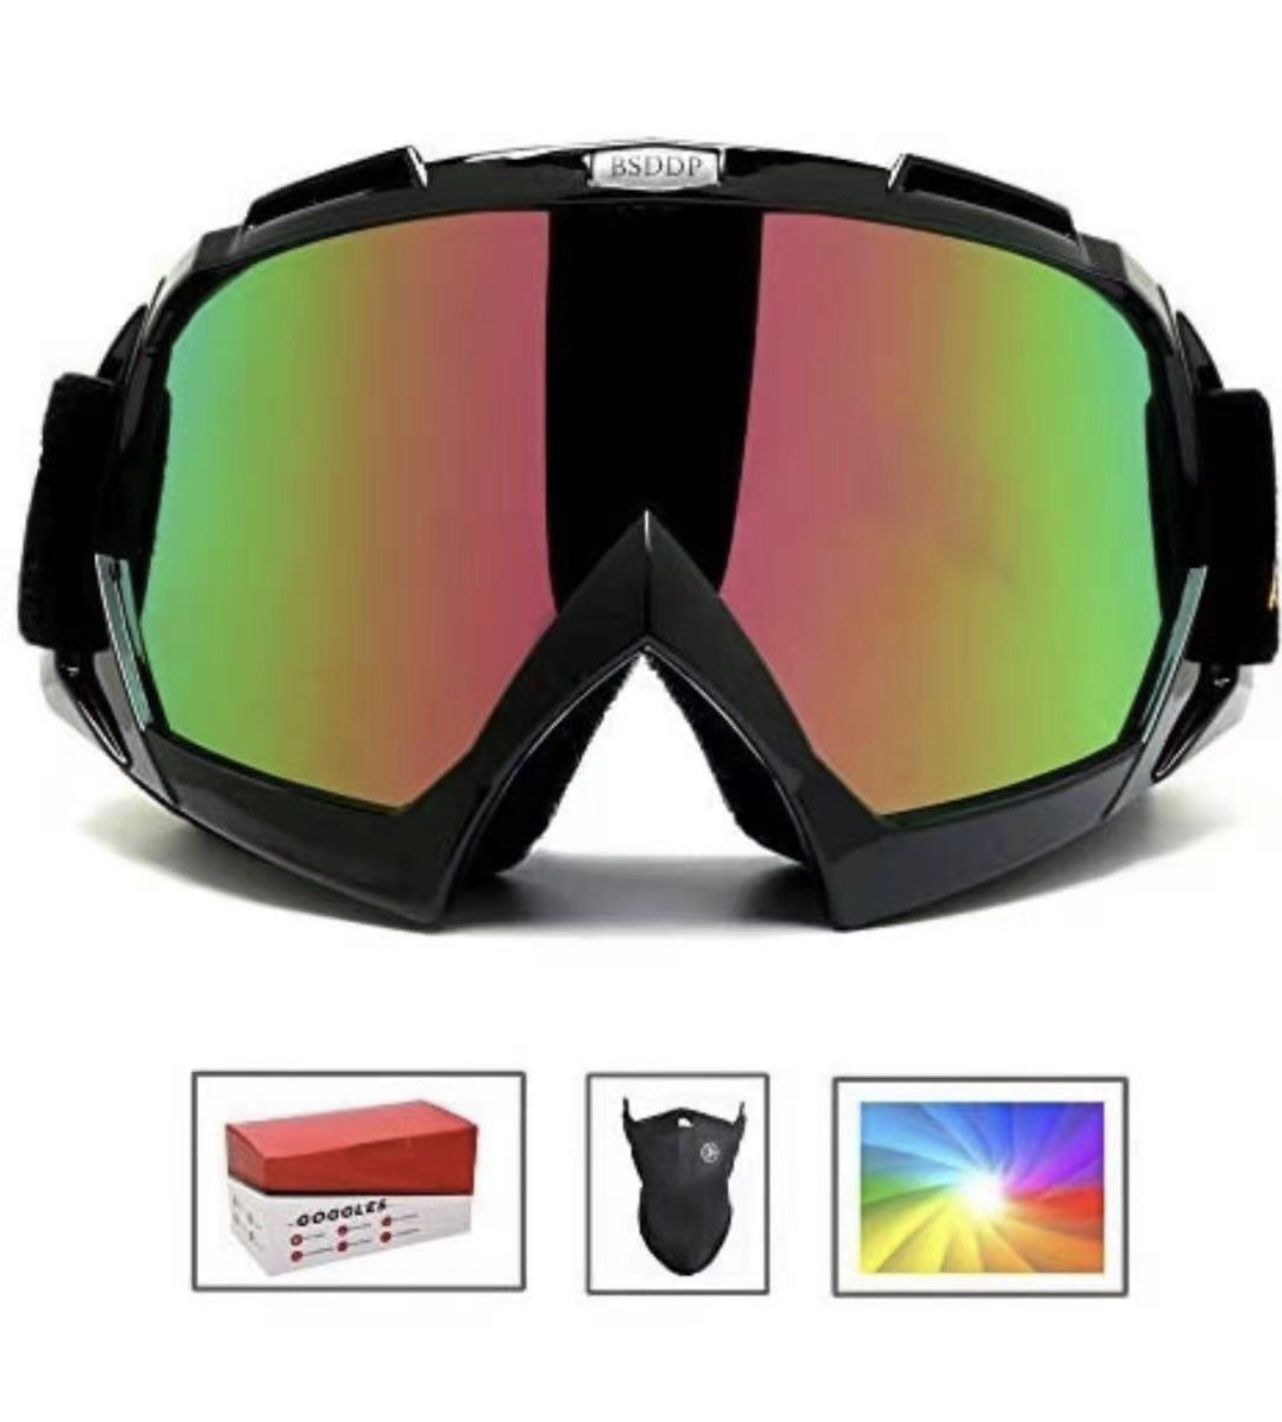 Adult Professional Ski Goggles Snowmobile Snowboard Skate Snow Skiing Goggles with 100% UV400 Protection Bright Lens TPC Frame Material Anti Sand Wind